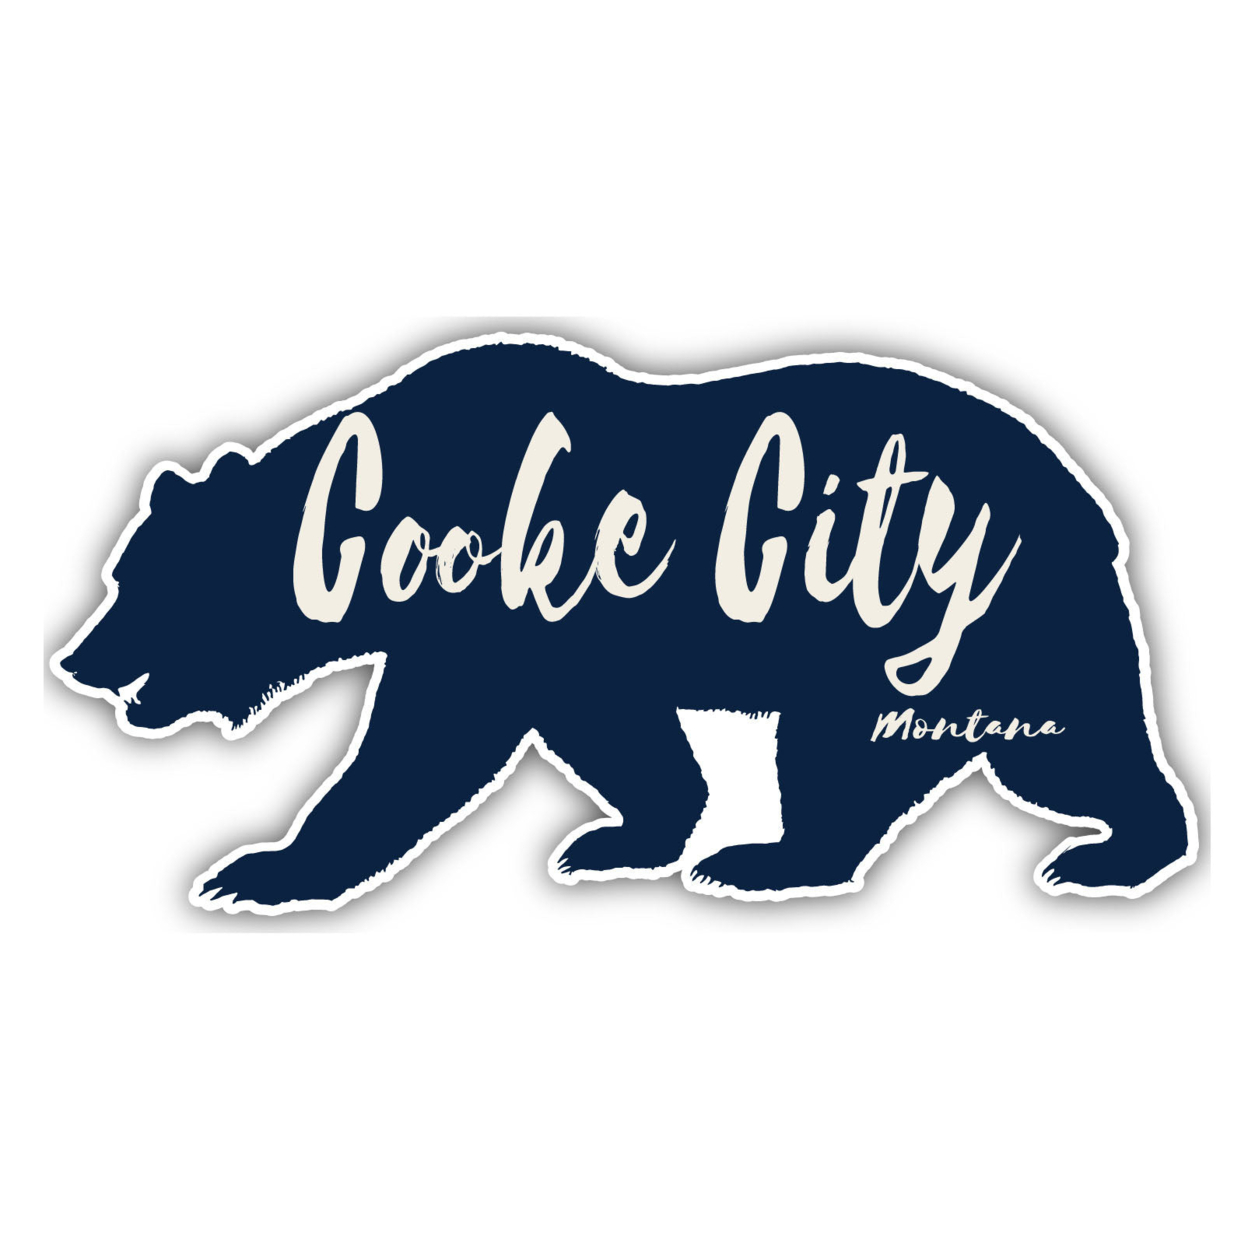 Cooke City Montana Souvenir Decorative Stickers (Choose Theme And Size) - 4-Pack, 10-Inch, Bear